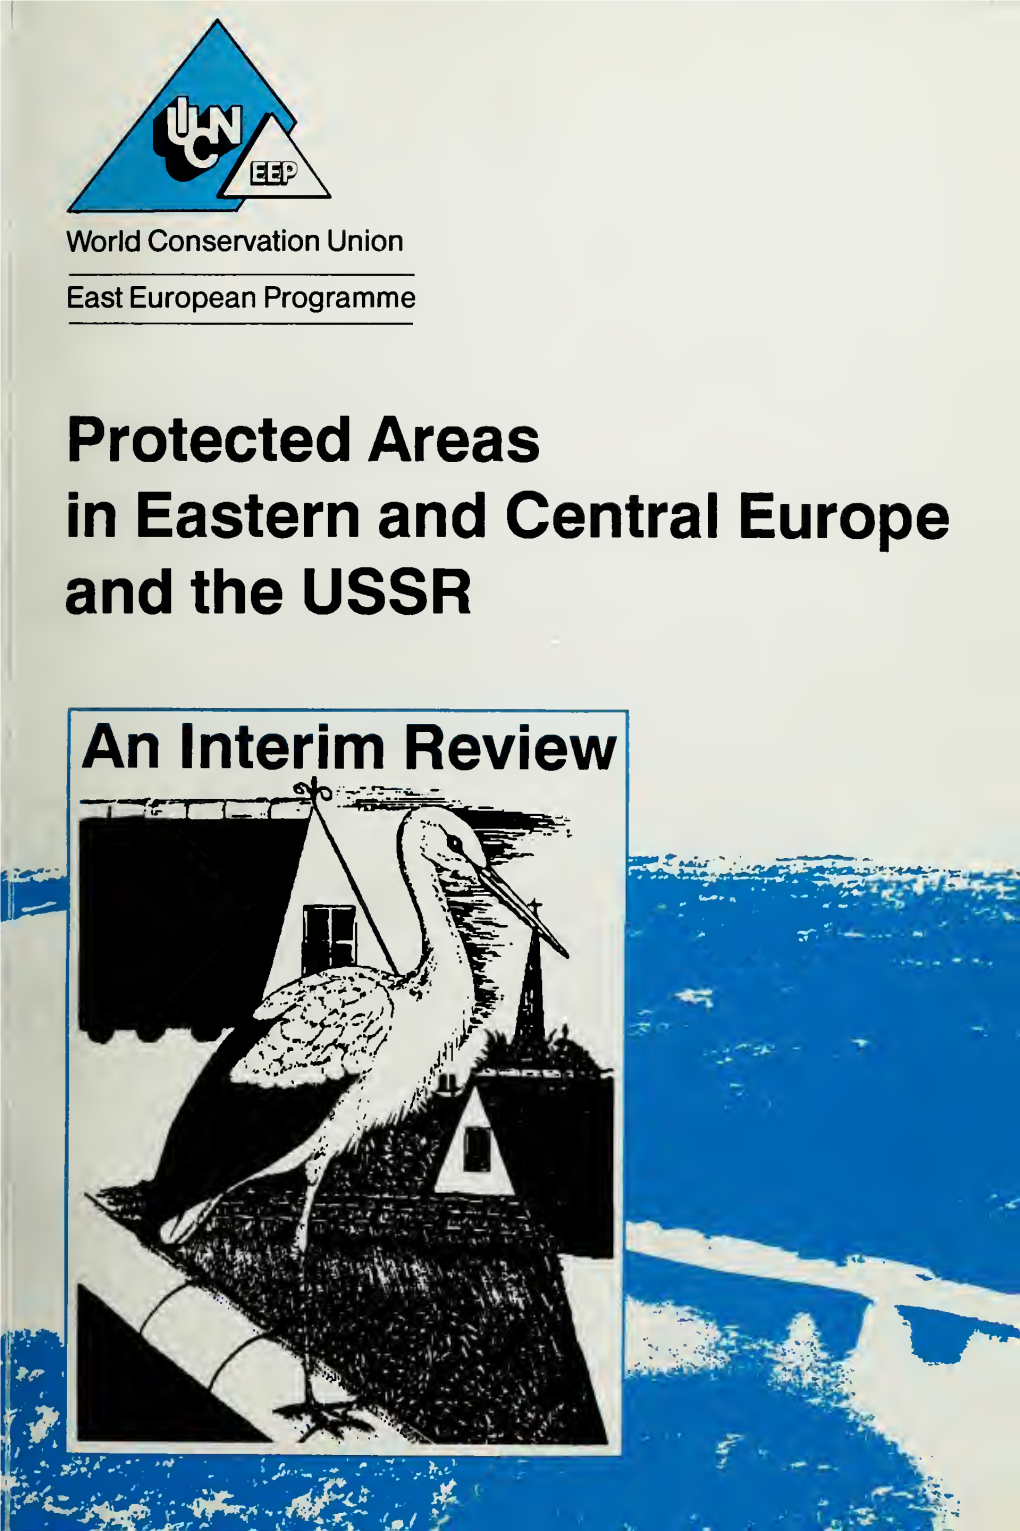 Protected Areas in Eastern and Central Europe and the USSR Digitized by Tine Internet Arciiive